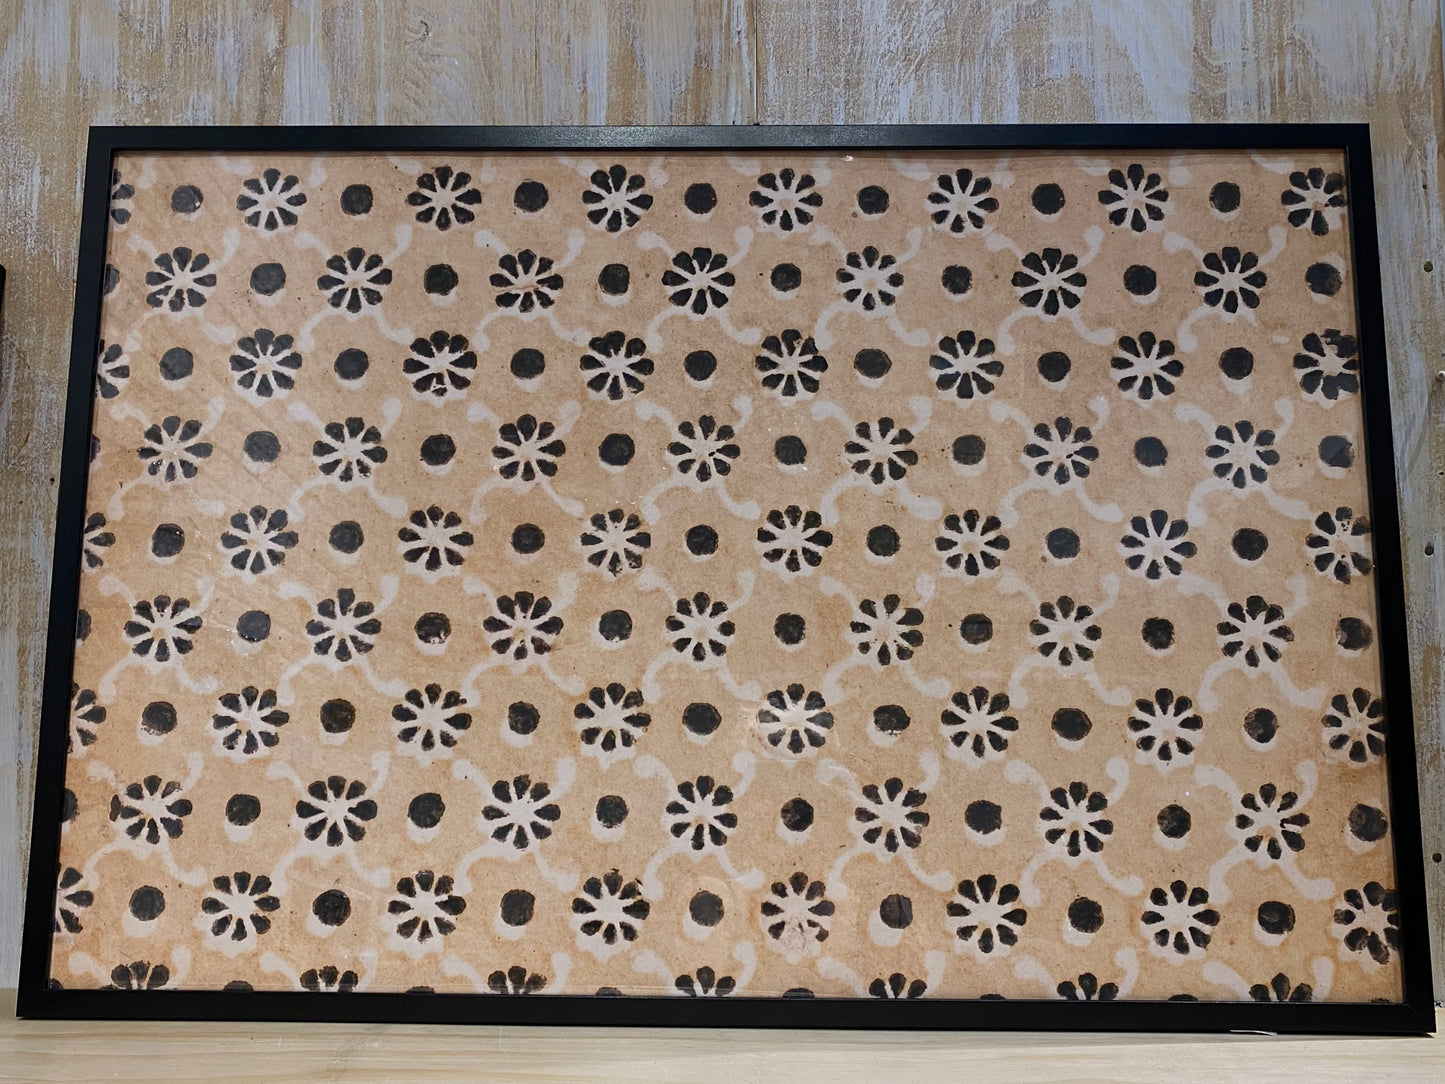 Flowers Dots and Pedals Pattern (24x36) Framed